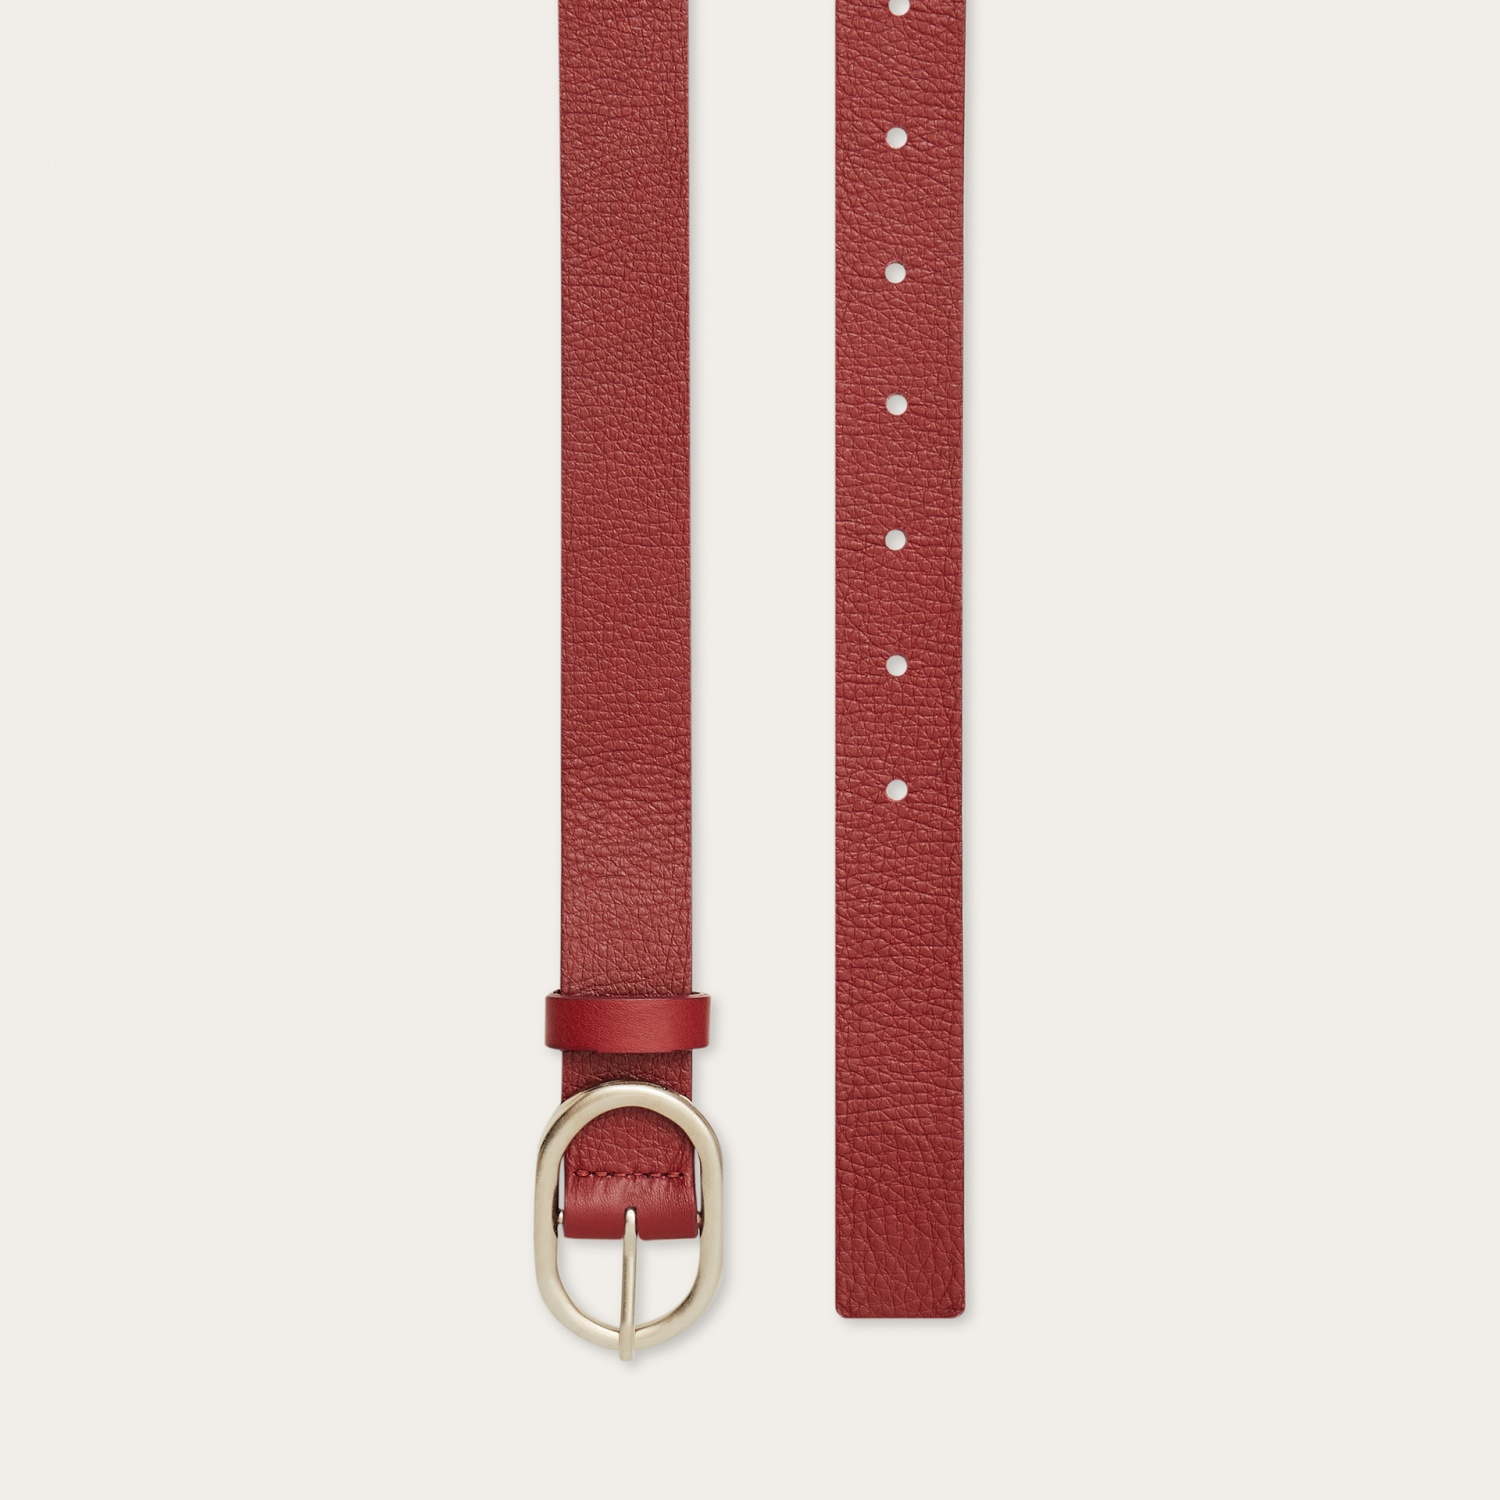  Belt with a round buckle, lipstic-6 